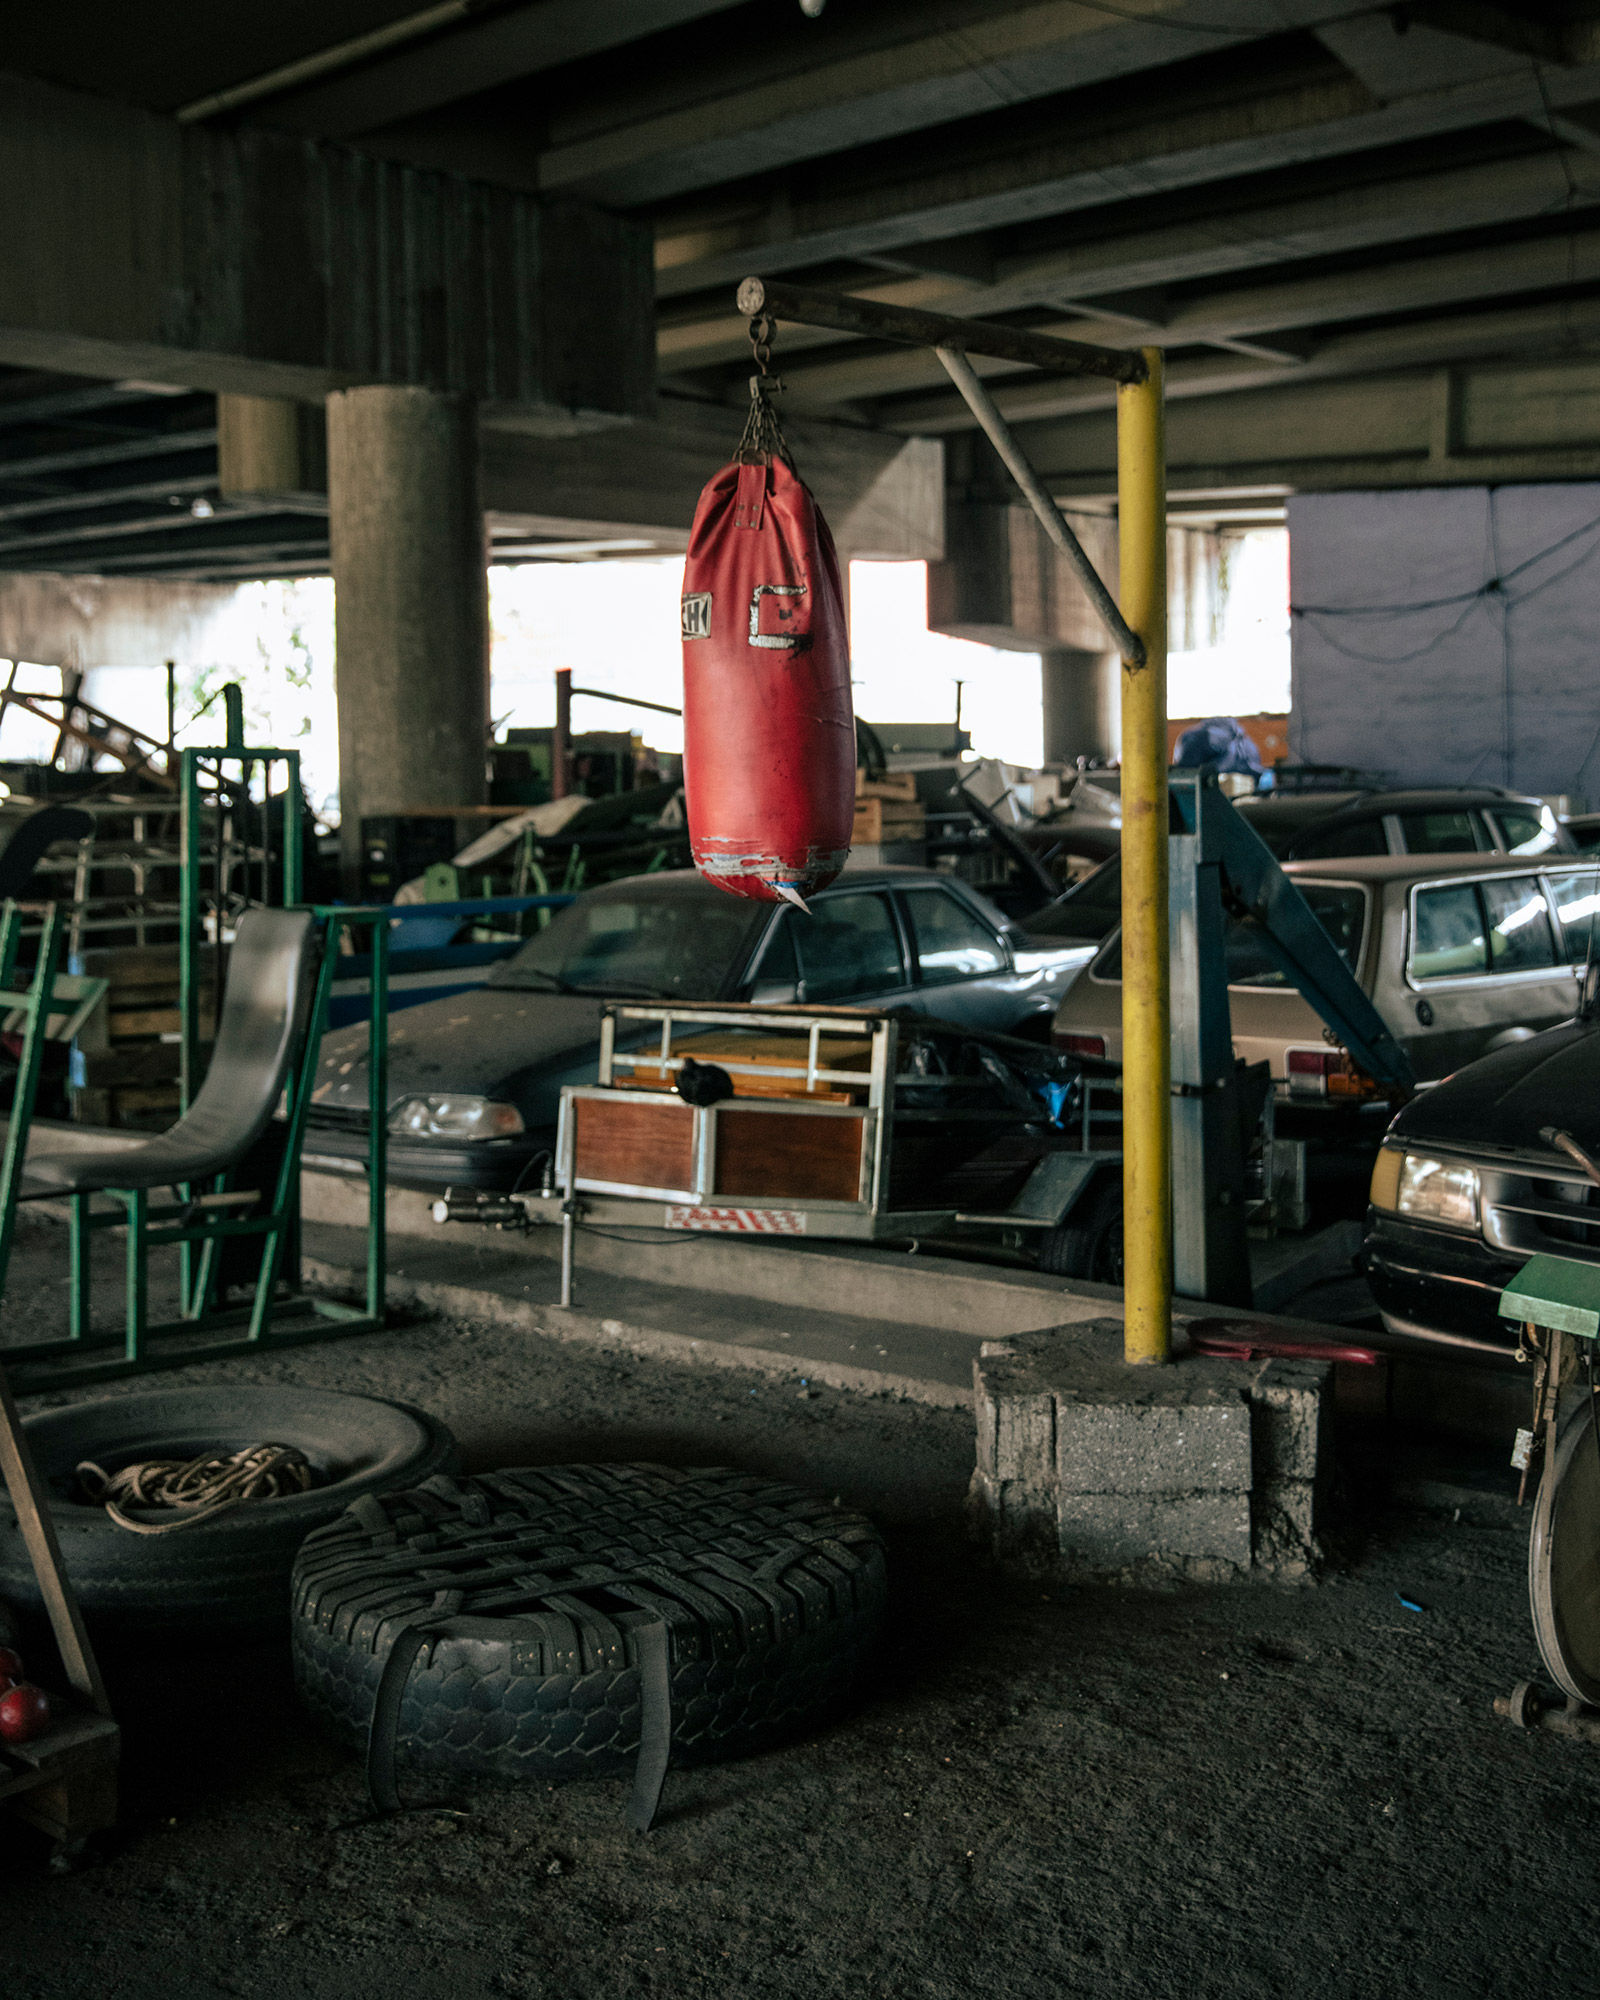 A boxing club in an abandoned cars garage